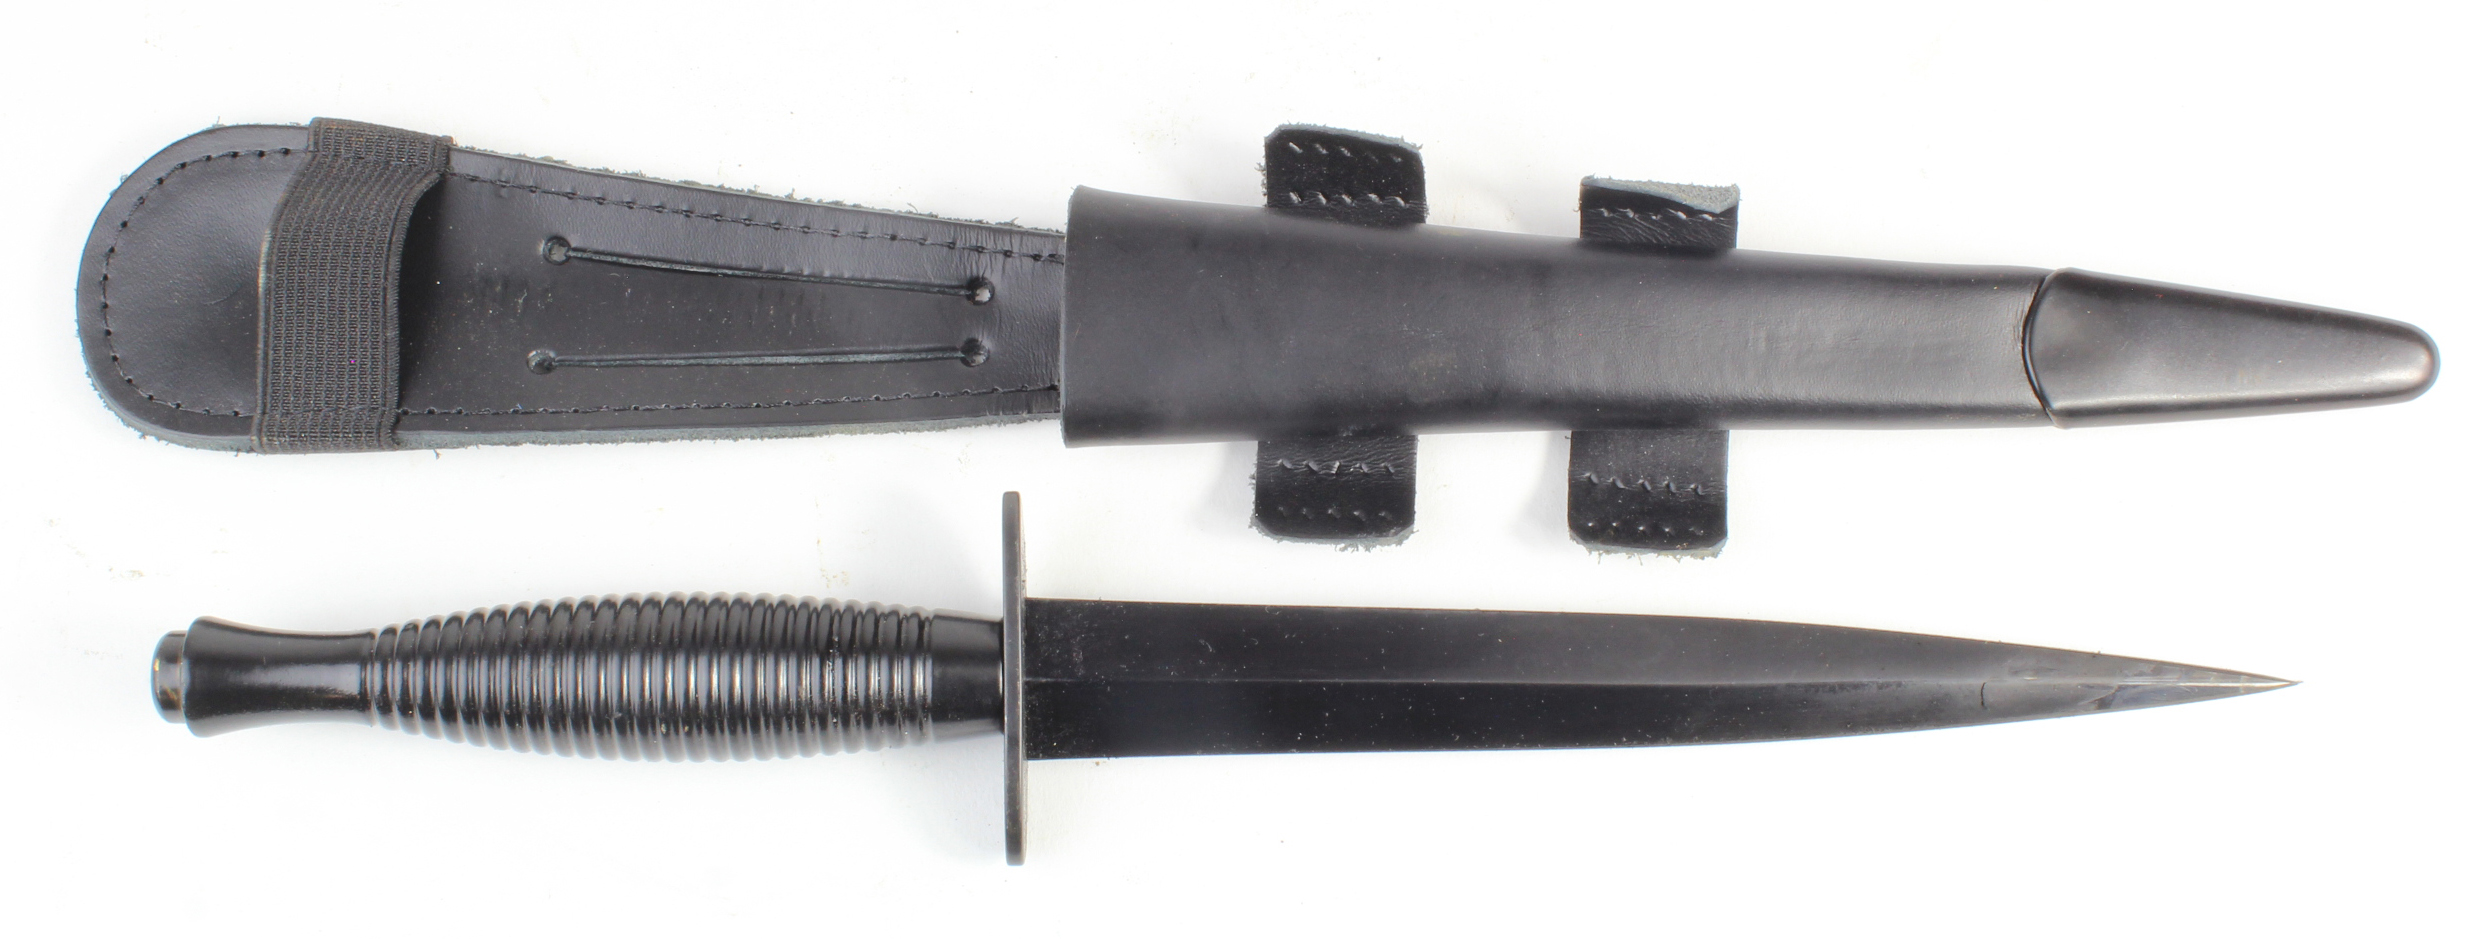 British Commando Current day issue dagger and scabbard. Marked "Sheffield England" and a Broadband